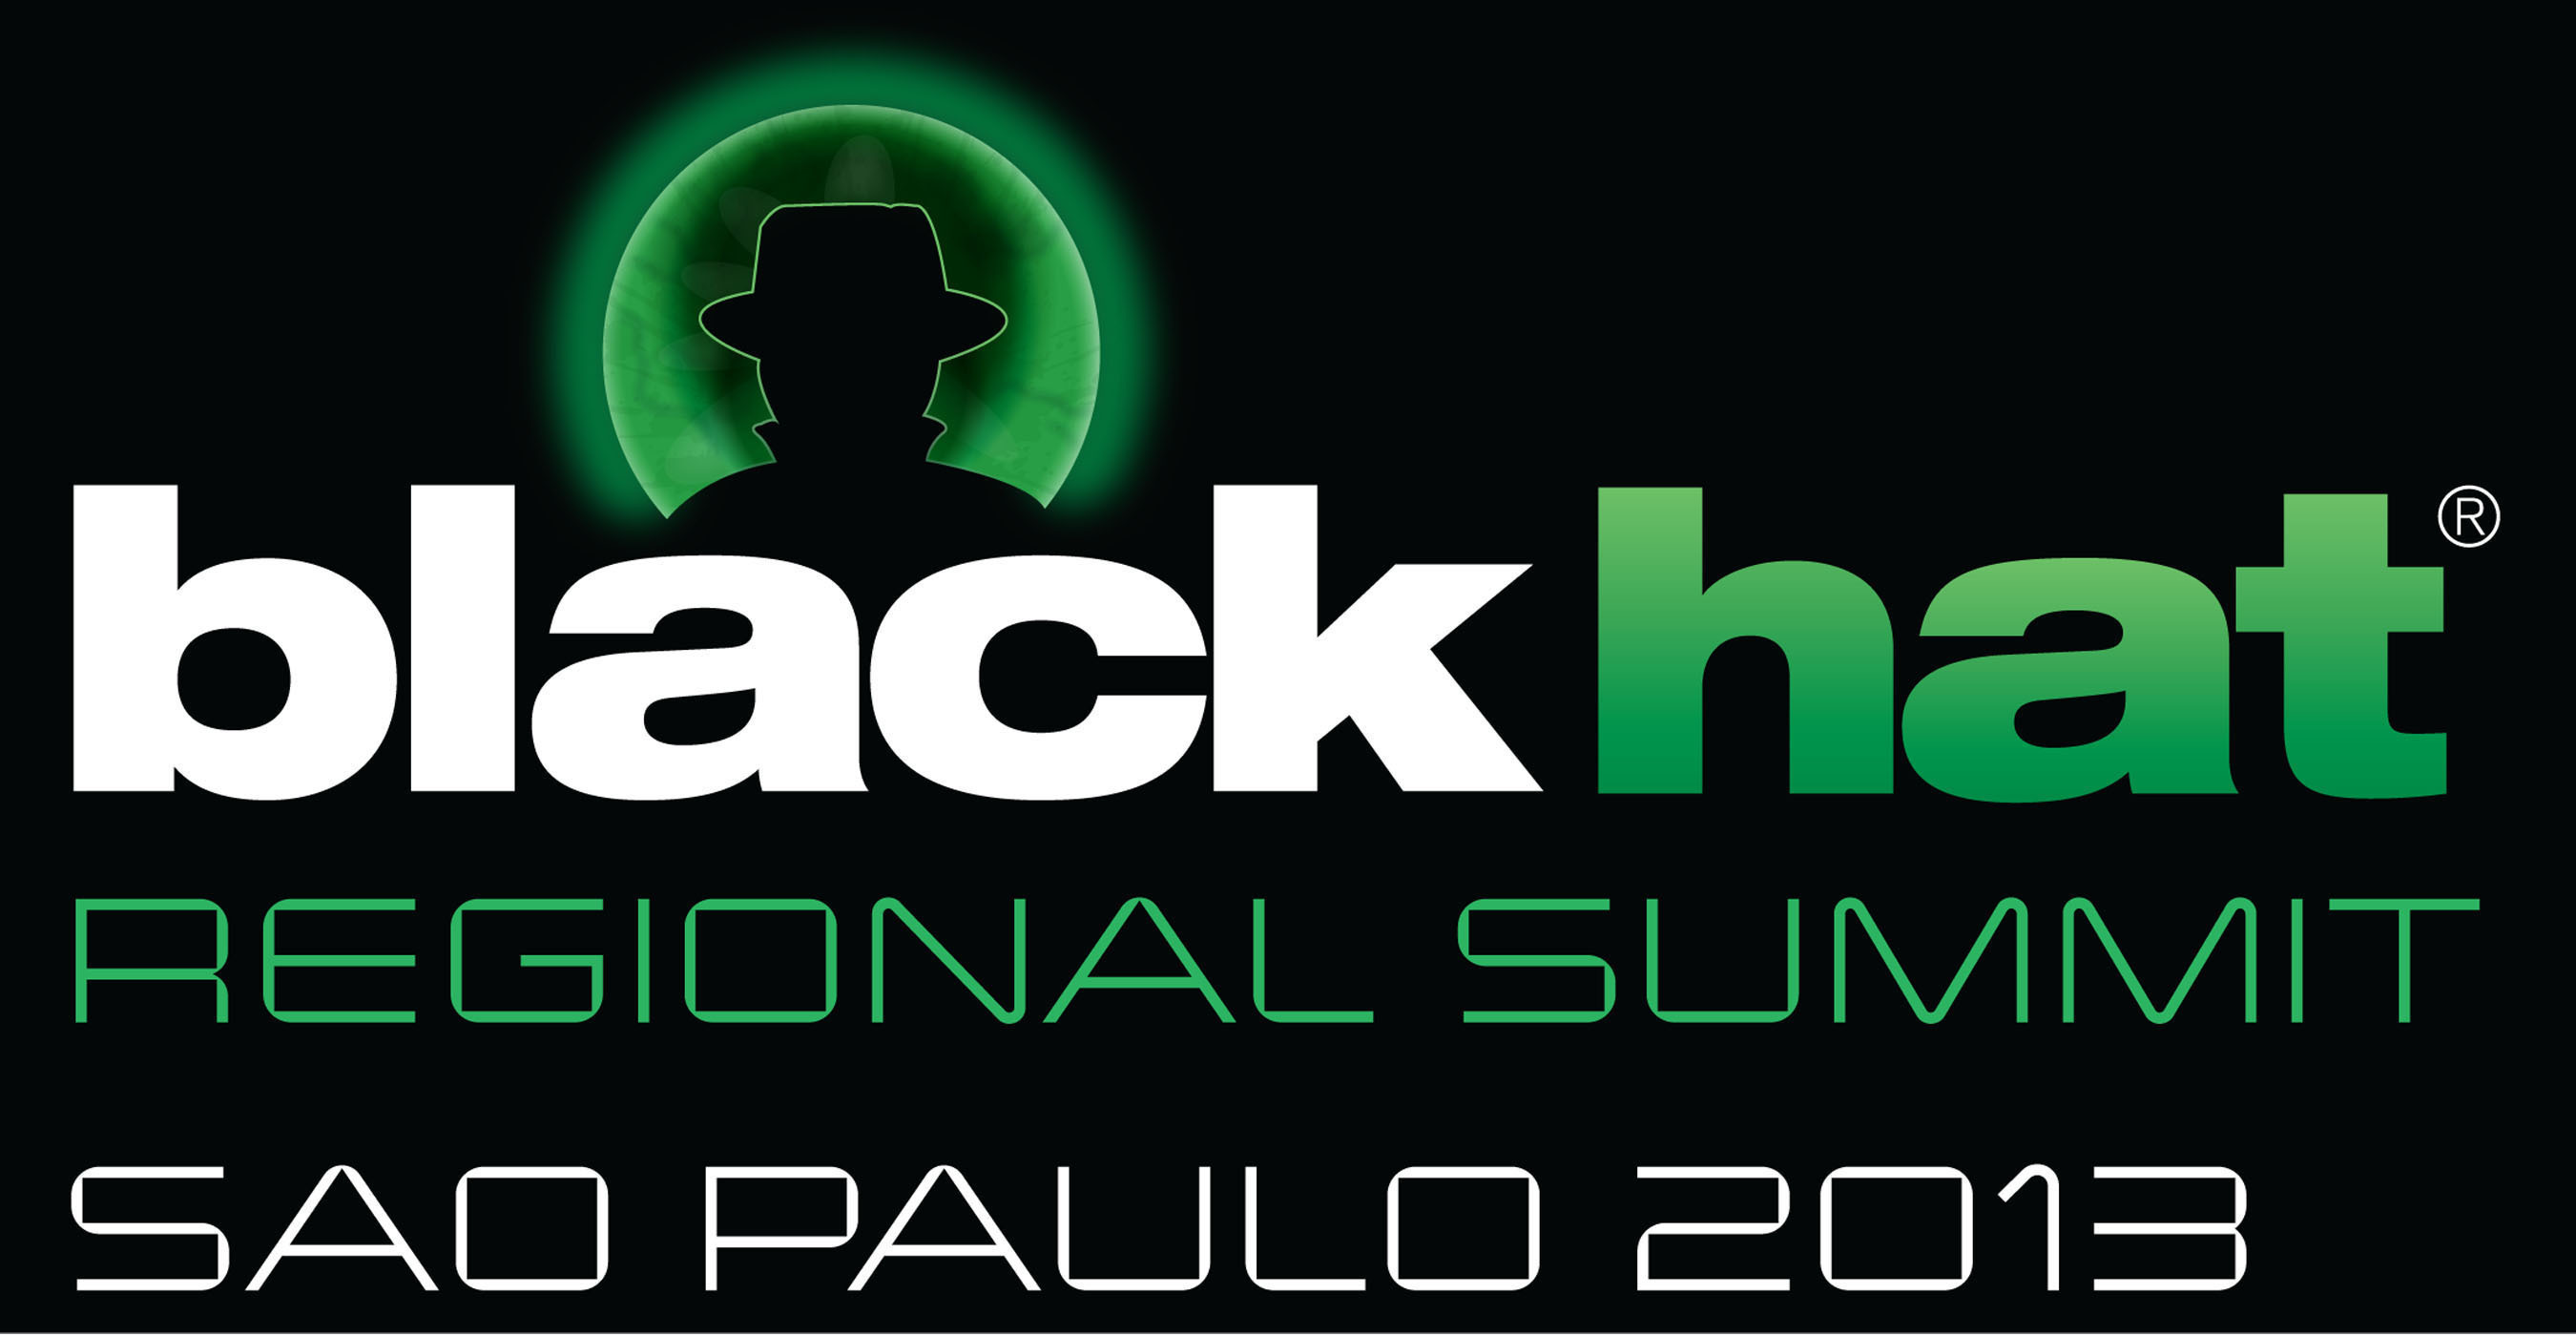 Black Hat To Launch First Regional Summit In Brazil. (PRNewsFoto/Black Hat) (PRNewsFoto/BLACK HAT)